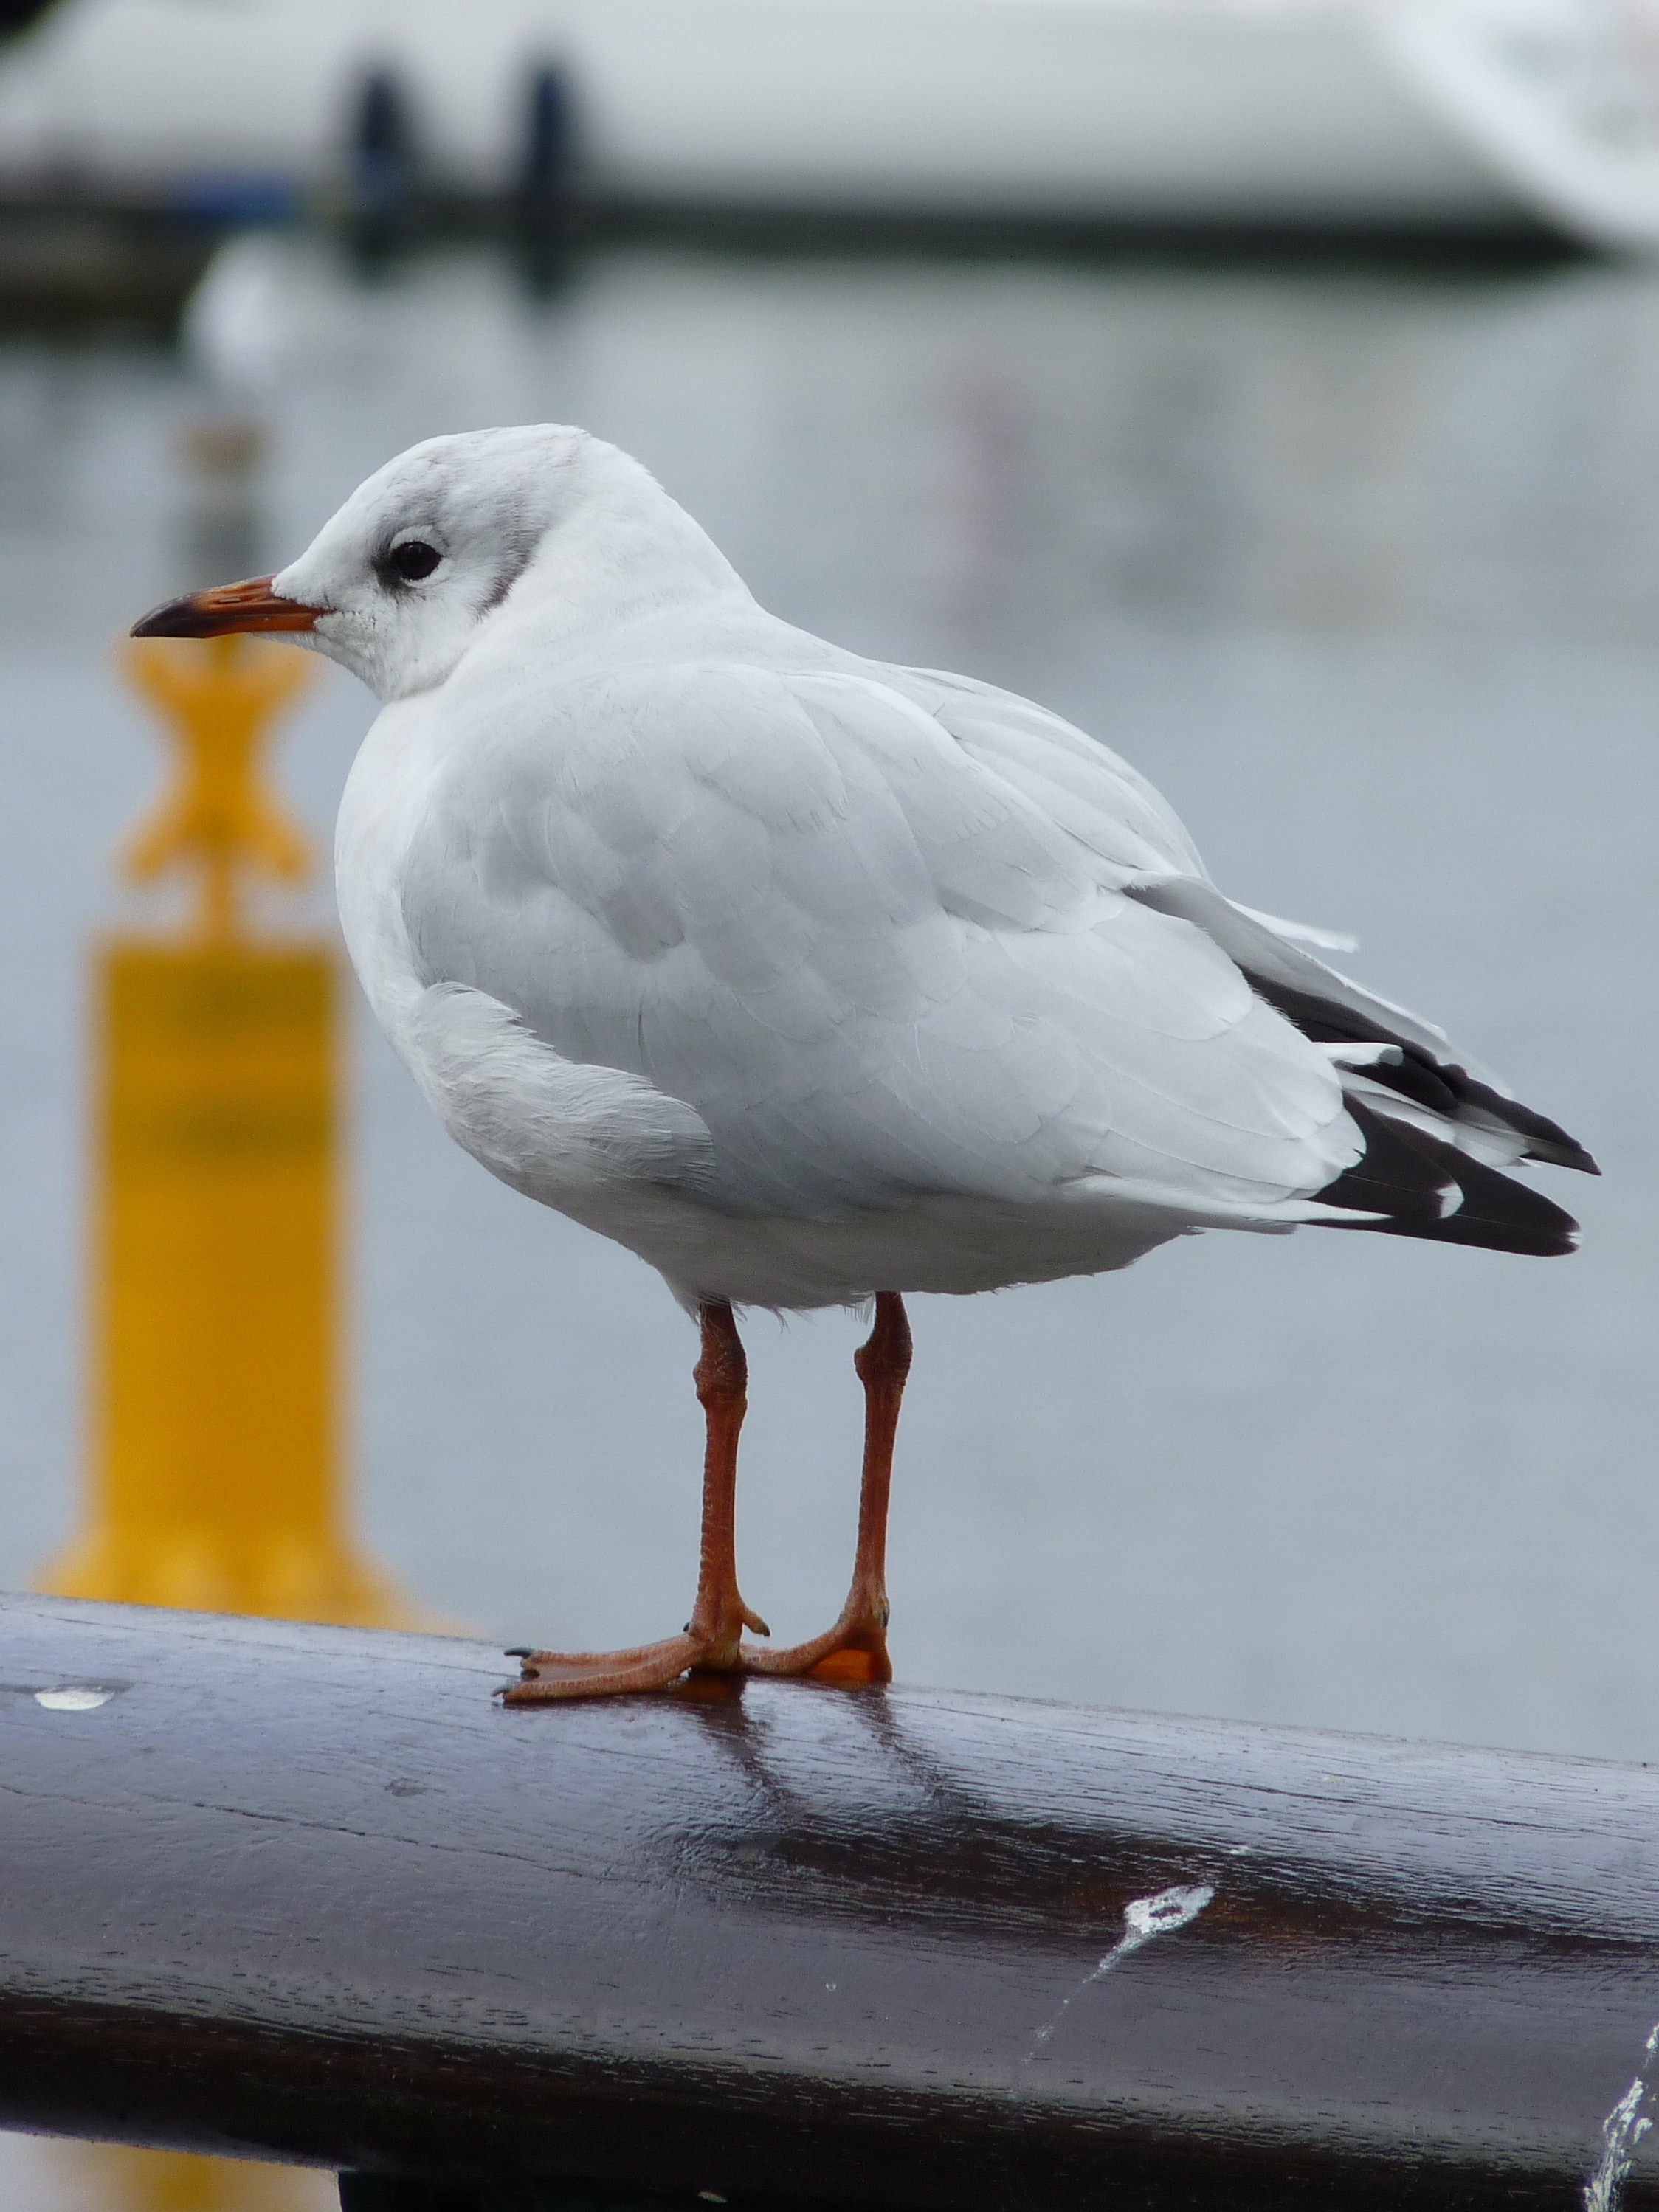 white feathered seagull on grip bar